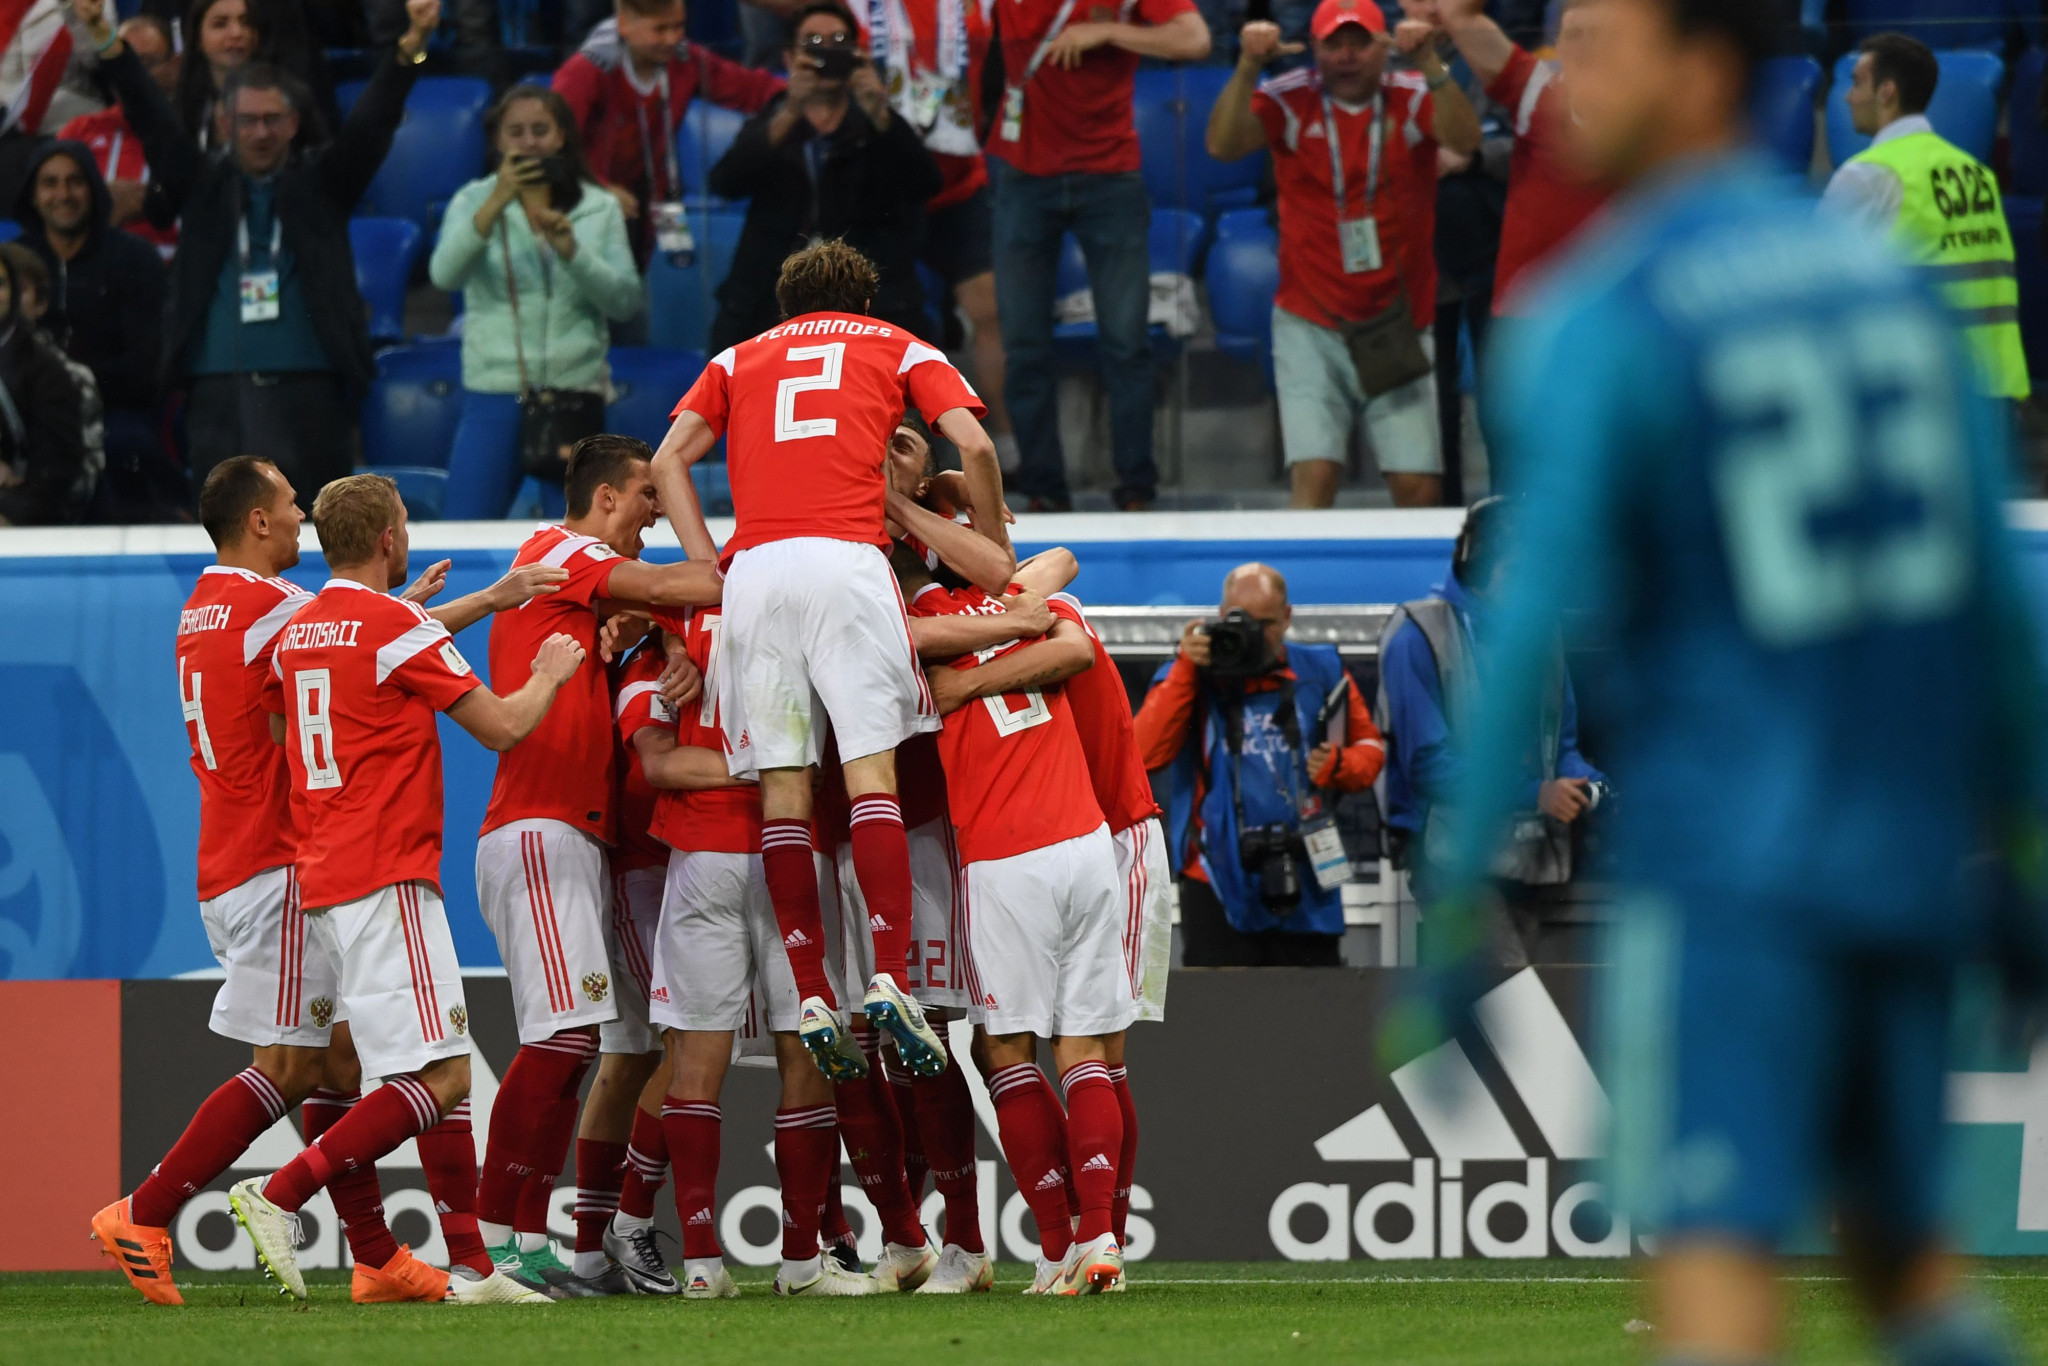 More Russian success and Japanese surprise at FIFA World Cup